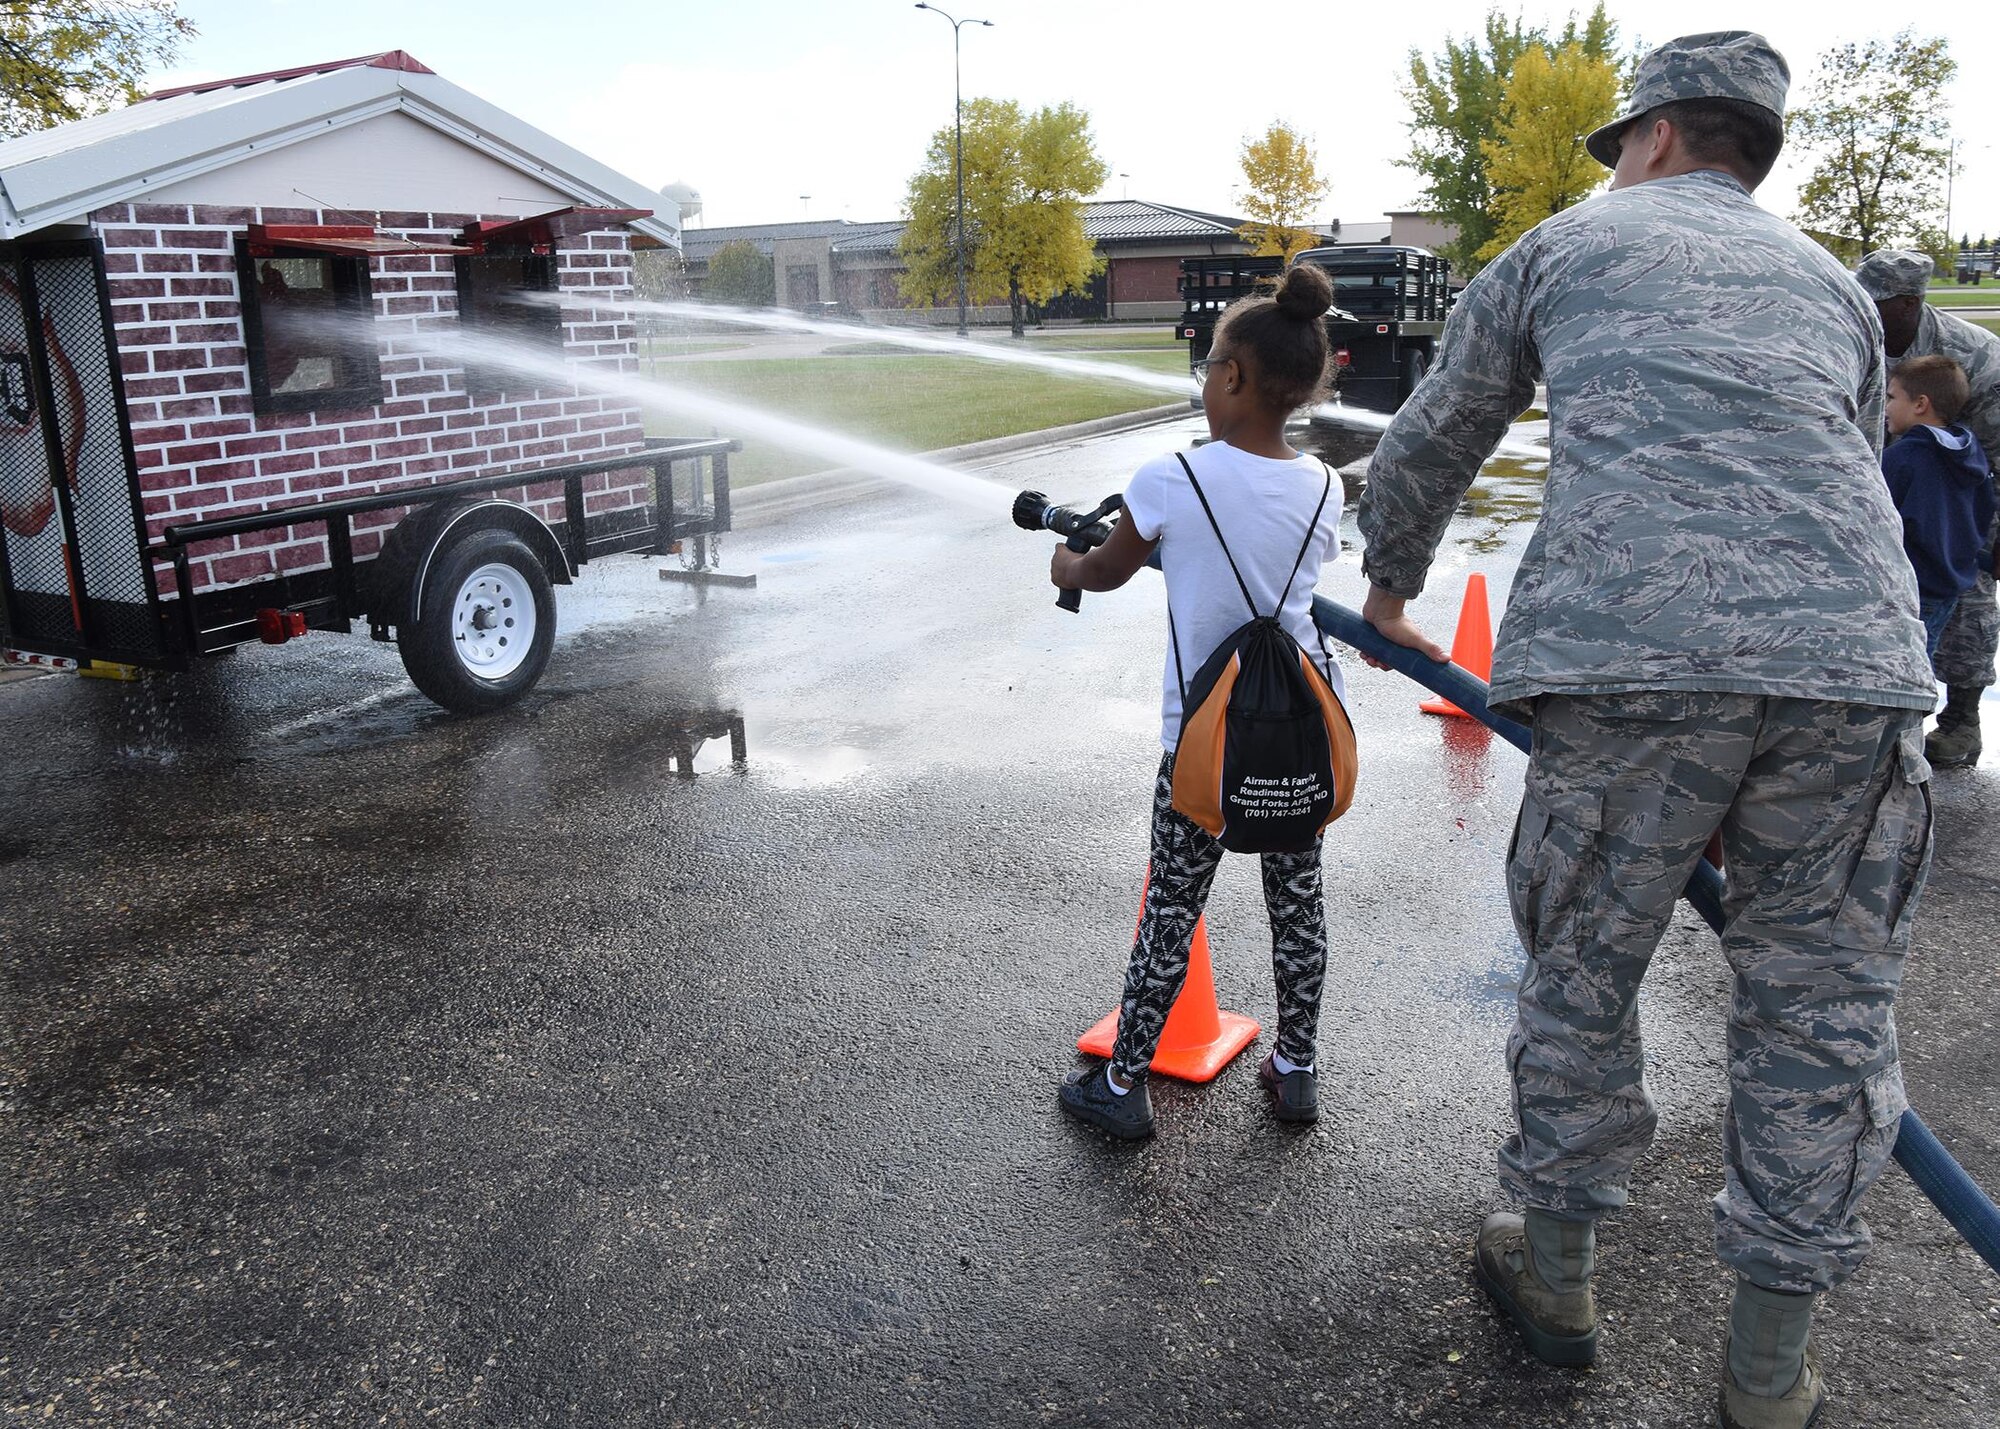 Staff Sgt. Jordan Patterson, 319 Civil Engineer Squadron fire inspector, helps a child spray water into a play house during a kid’s deployment day event Sept. 29, 2017, at Grand Forks Air Force Base, North Dakota. The deployment day, which was sponsored by the Network 5/6, featured activities such as a military working dog demo, obstacle course, combatives and more. (U.S. Air Force photo/Senior Airman Cierra Presentado)